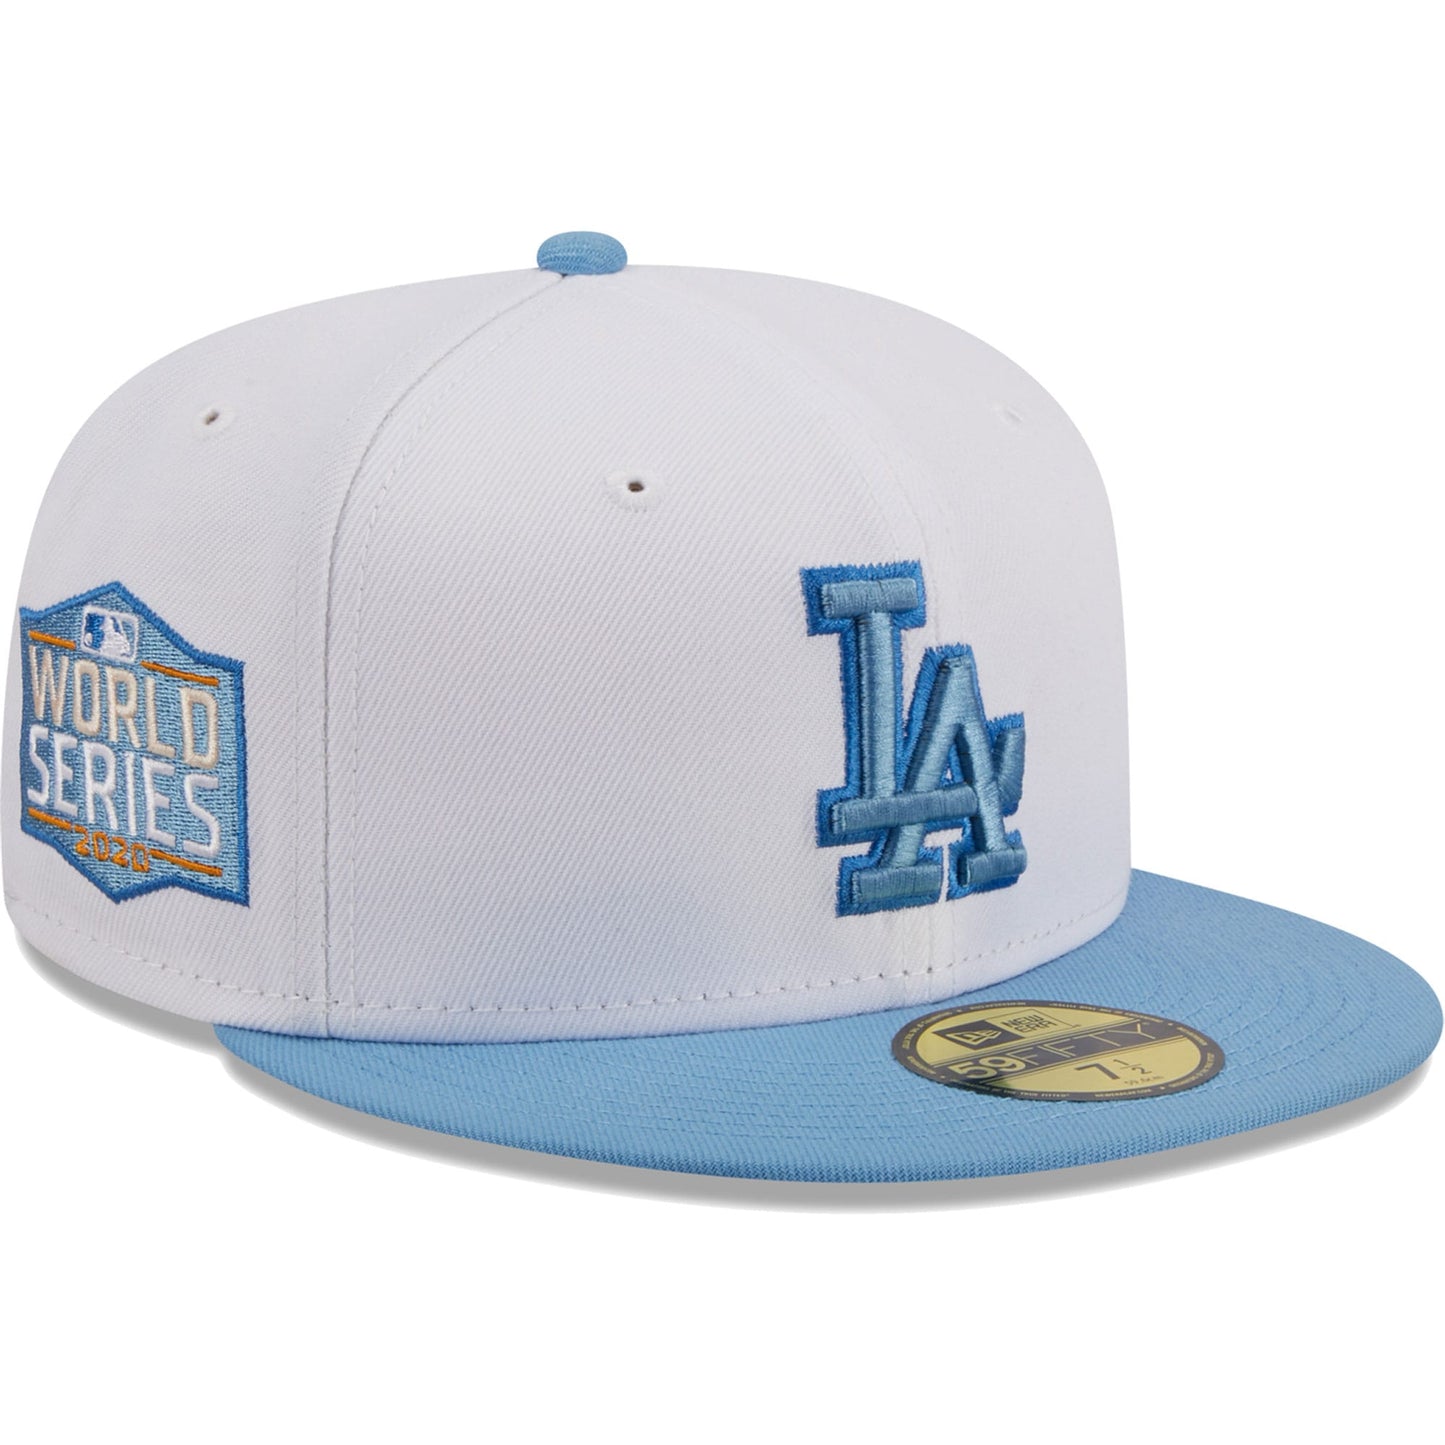 Los Angeles Dodgers New Era Sky 59FIFTY Fitted Hat - White